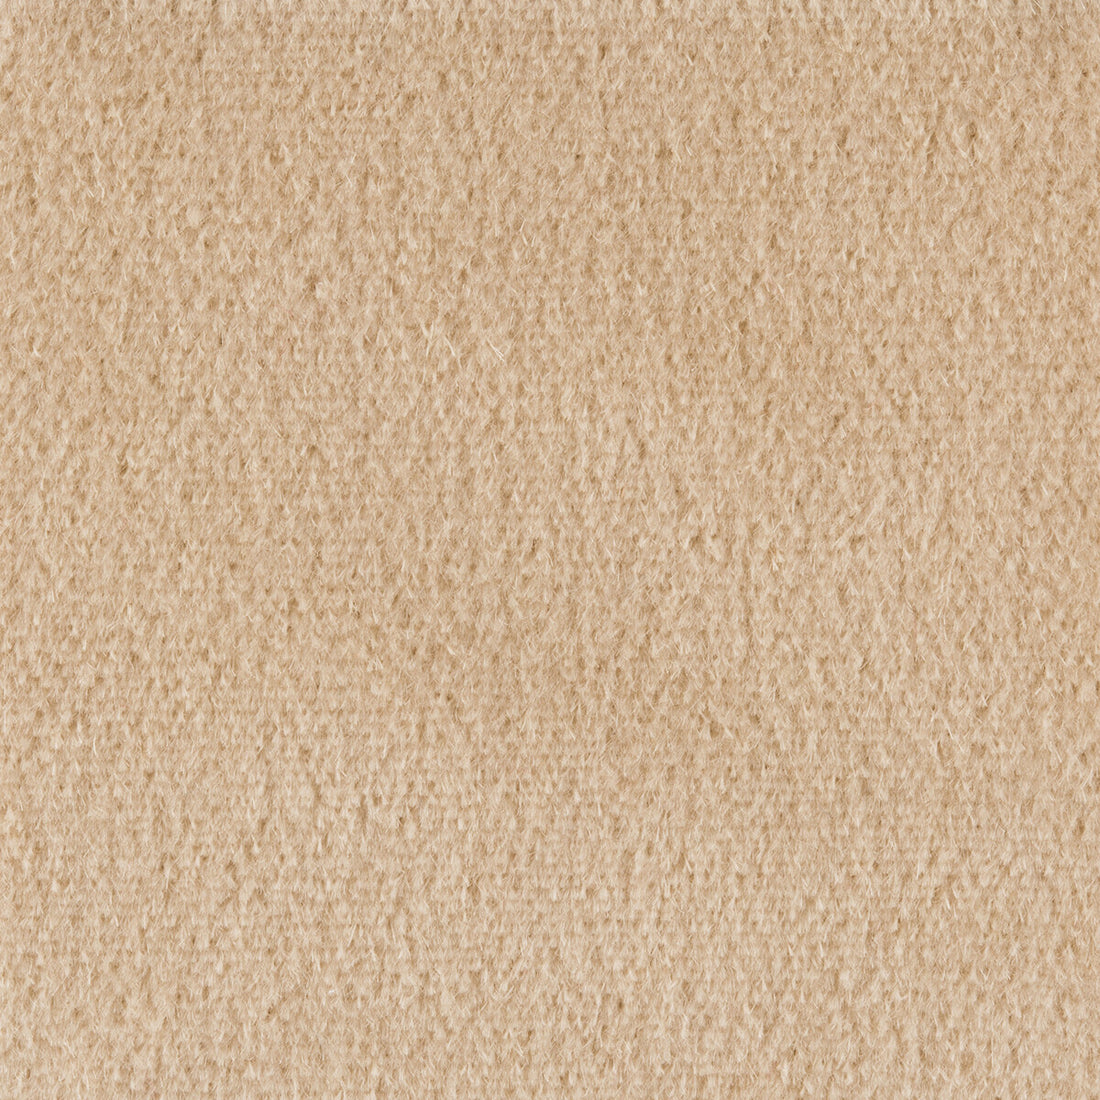 Autun Mohair Velvet fabric in almond color - pattern BR-89778.018.0 - by Brunschwig &amp; Fils